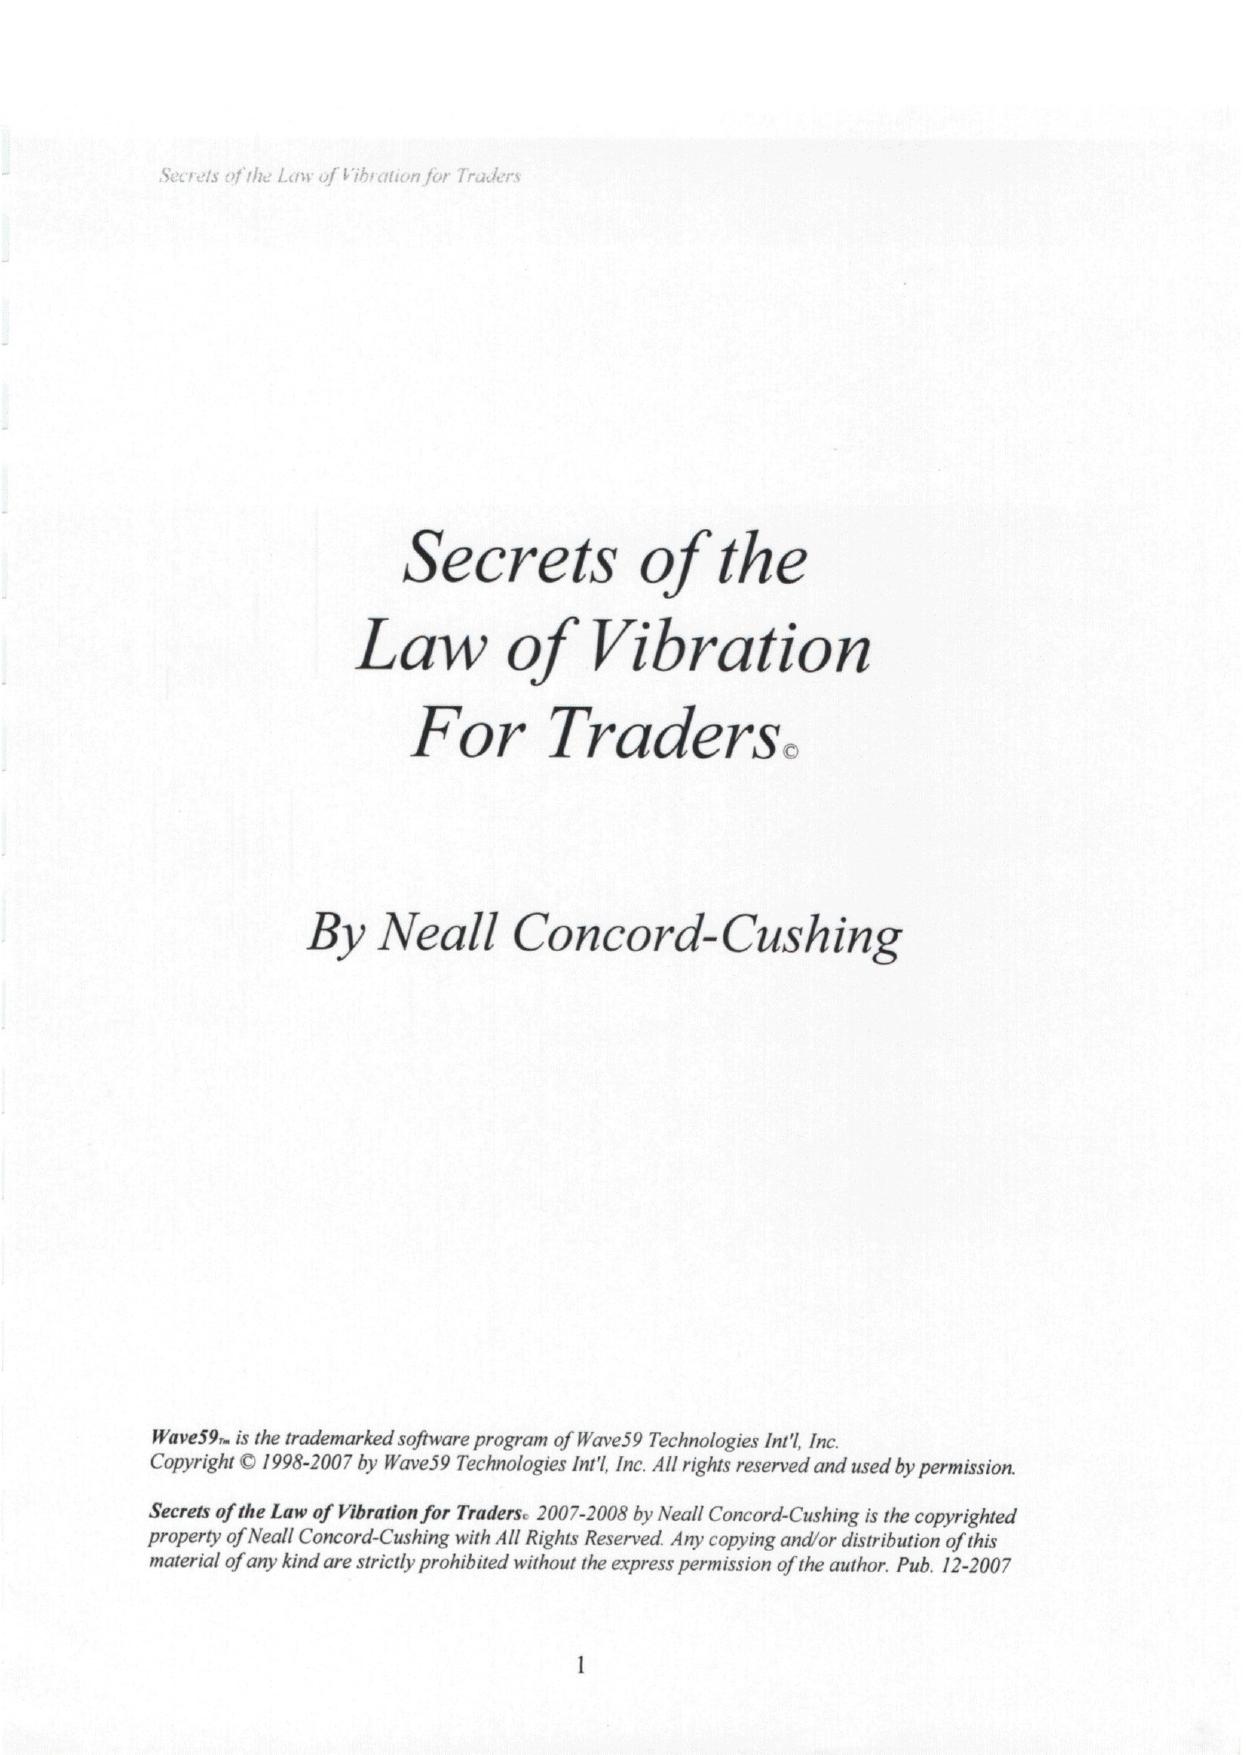 Secrets of the Law of Vibration for Traders